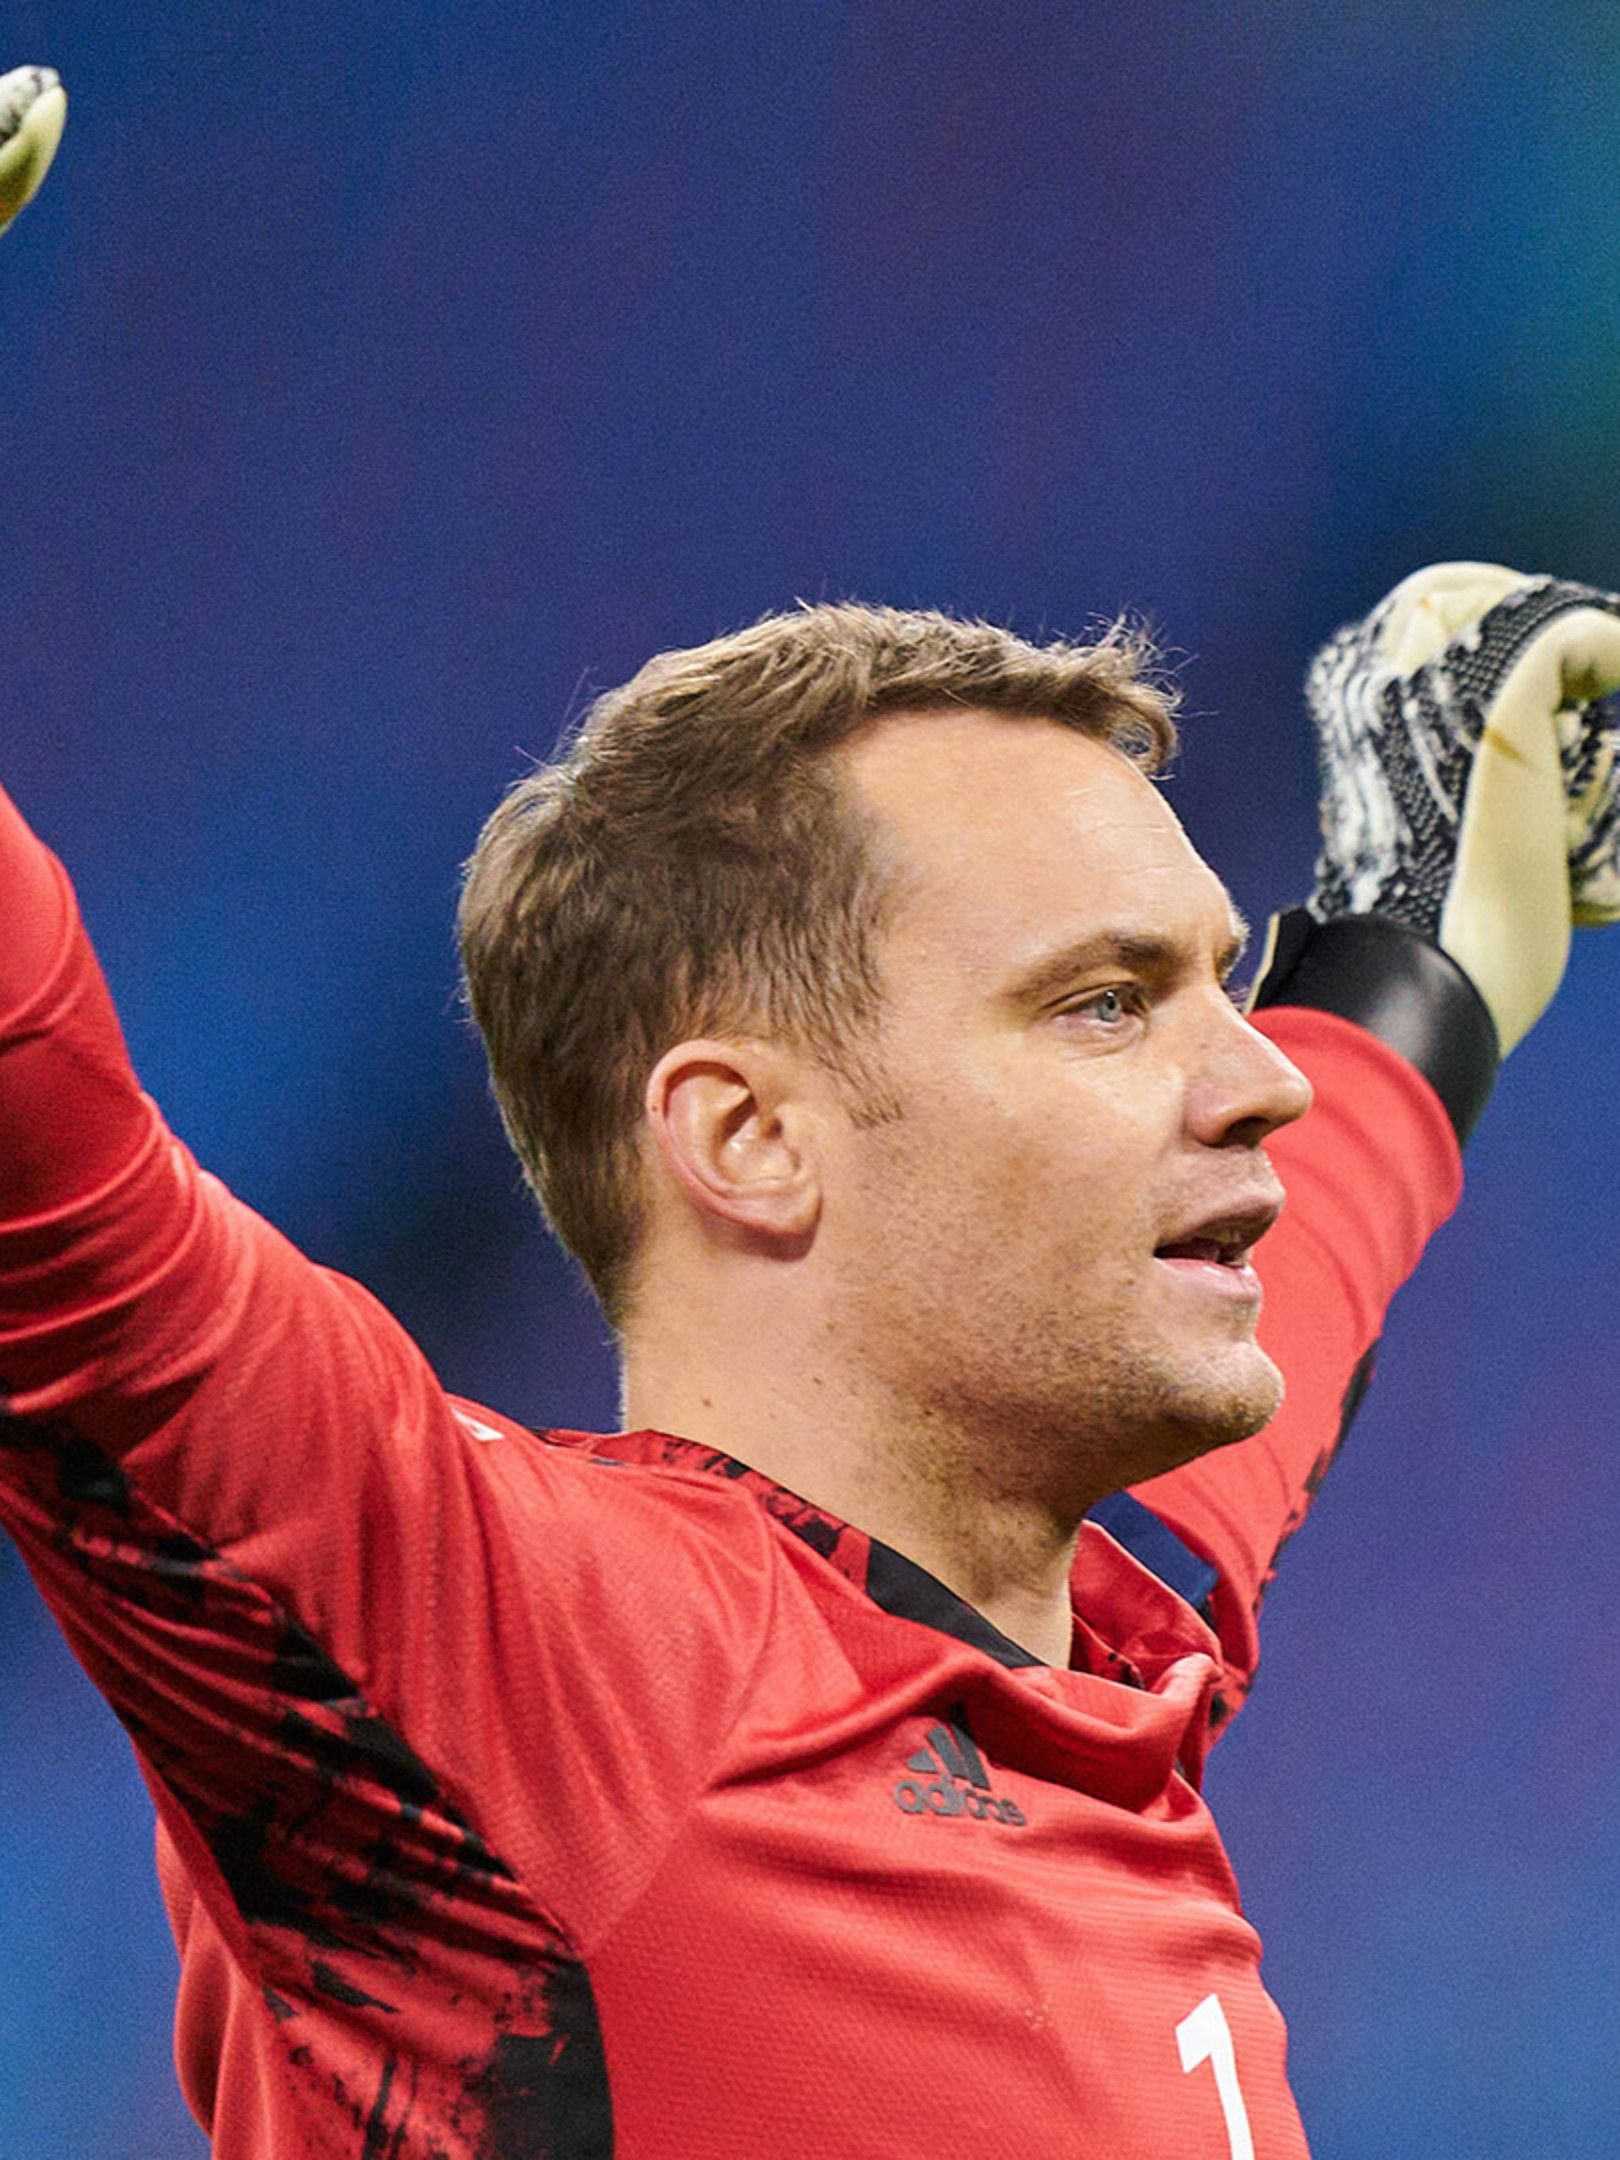 Manuel Neuer is Germany national team player of the year 2020